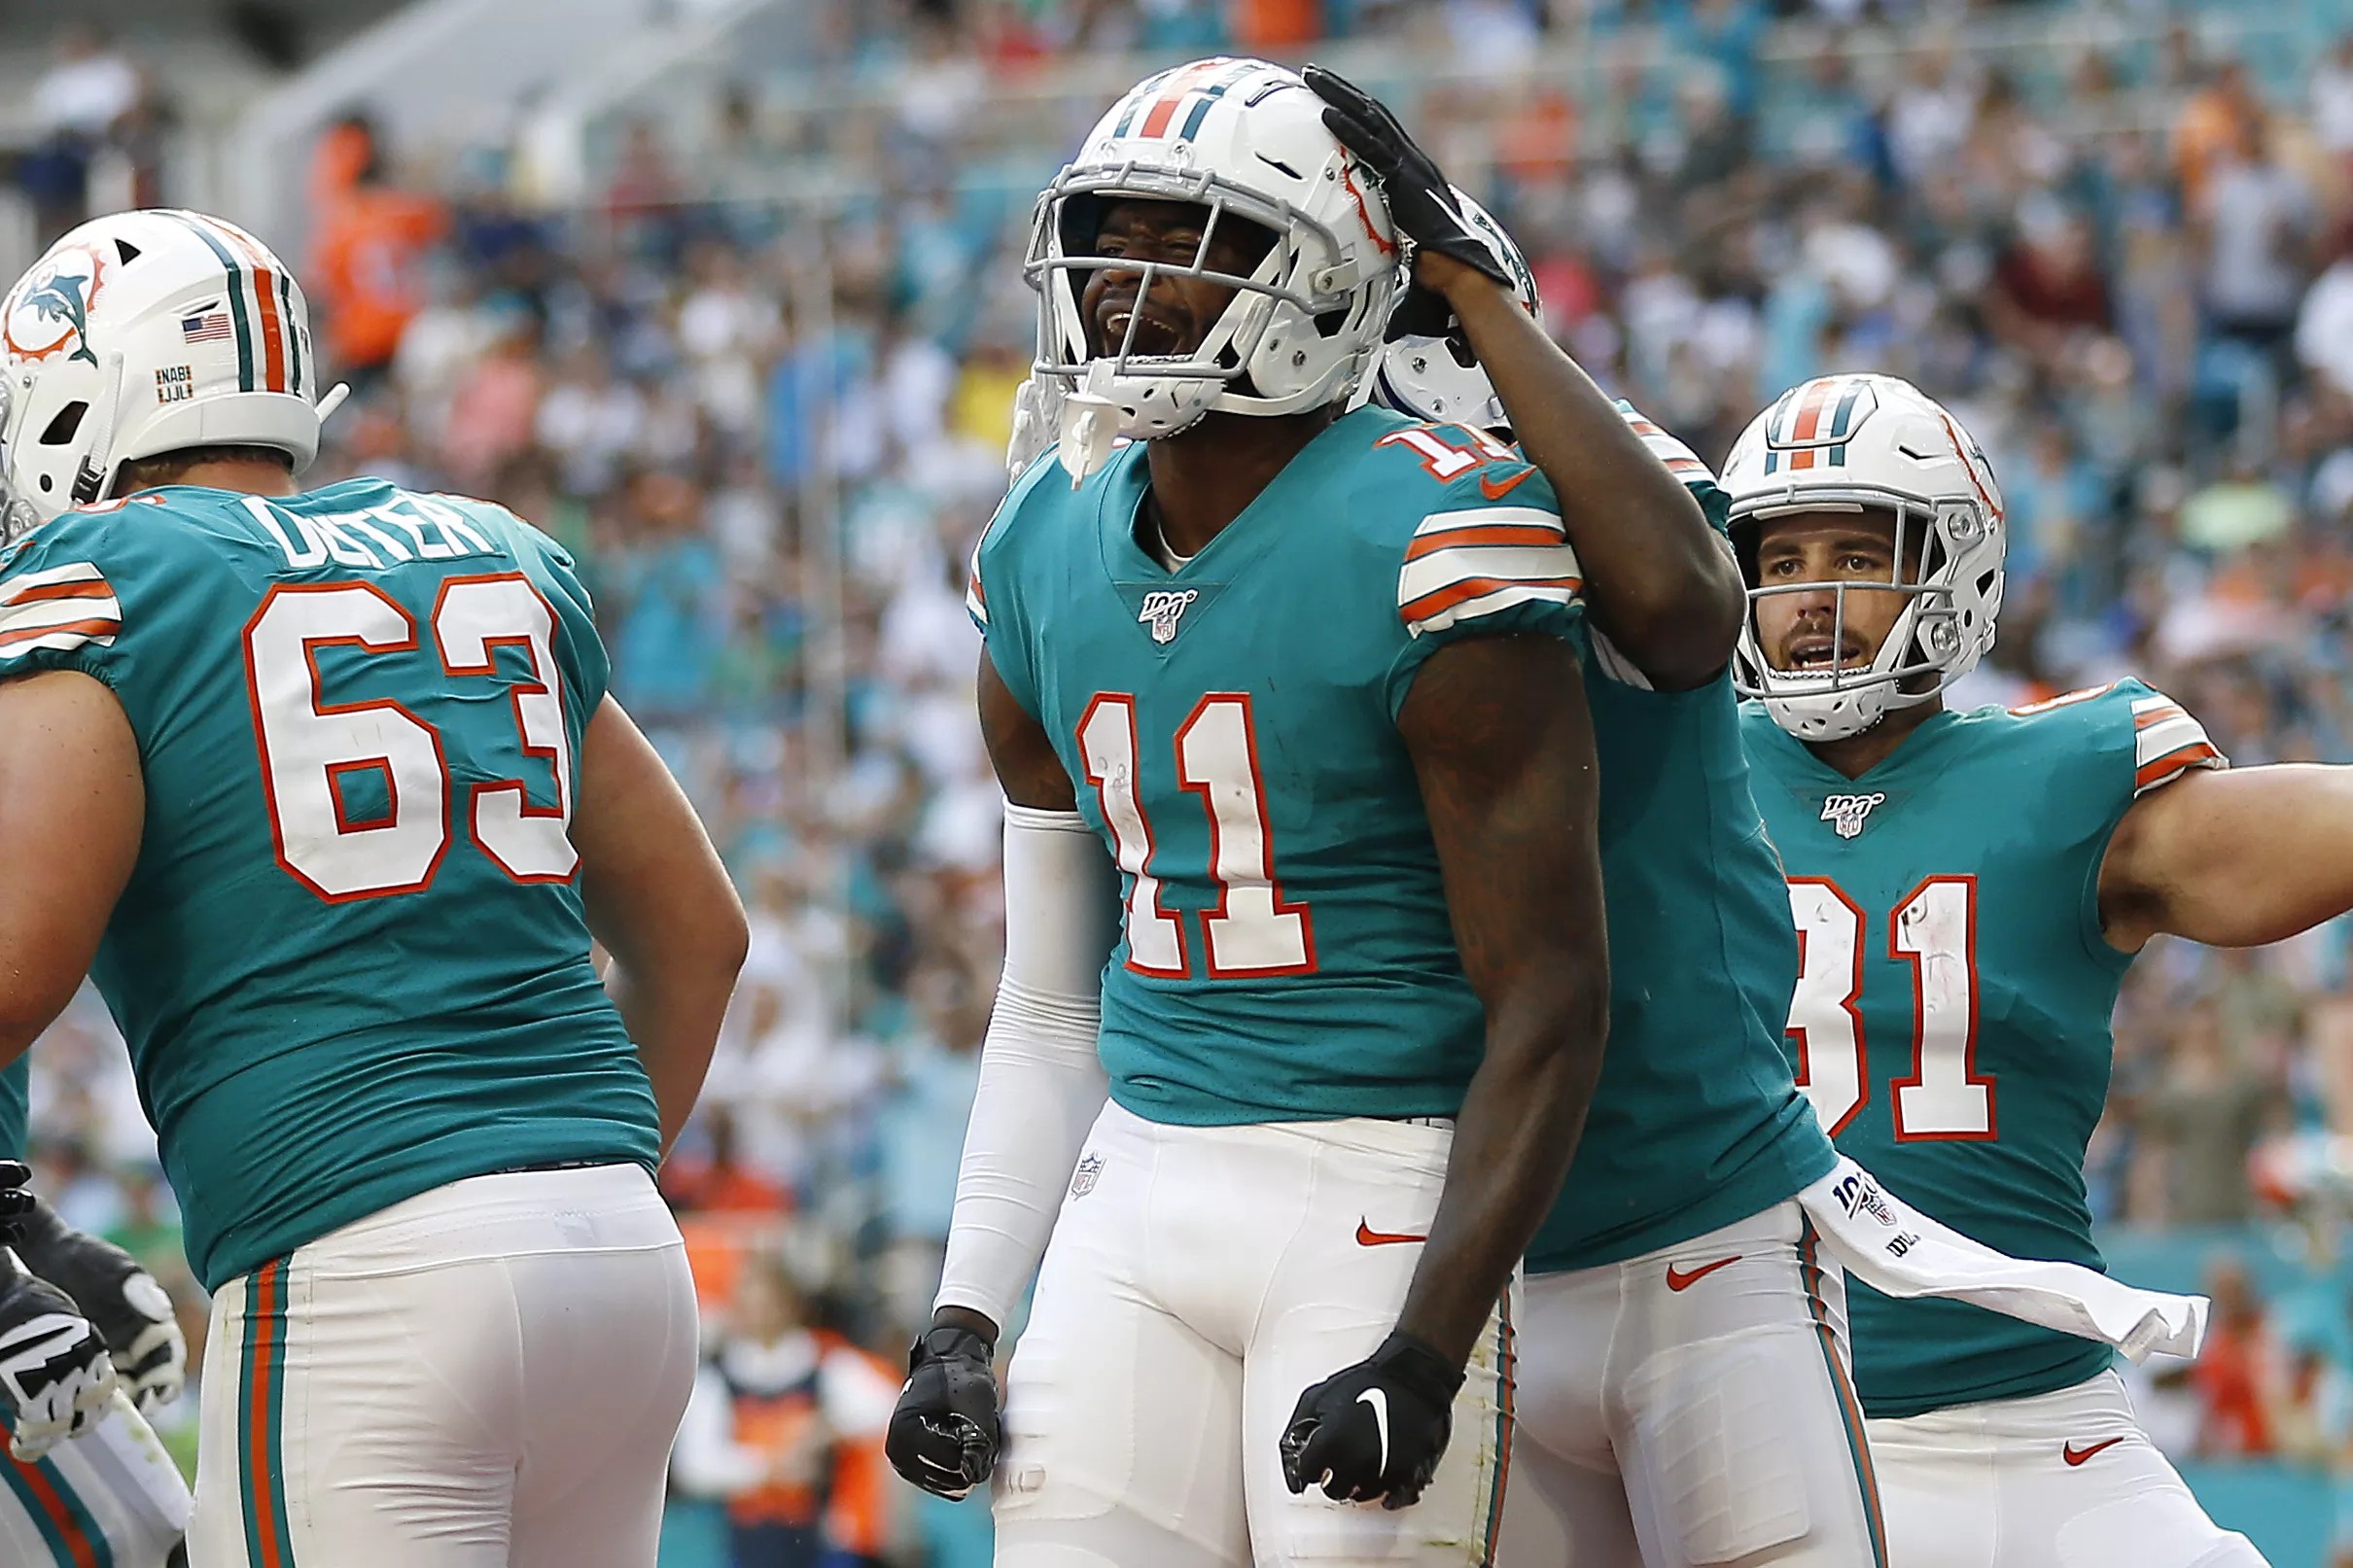 Eagles at Dolphins recap Stock watch for Miami following win